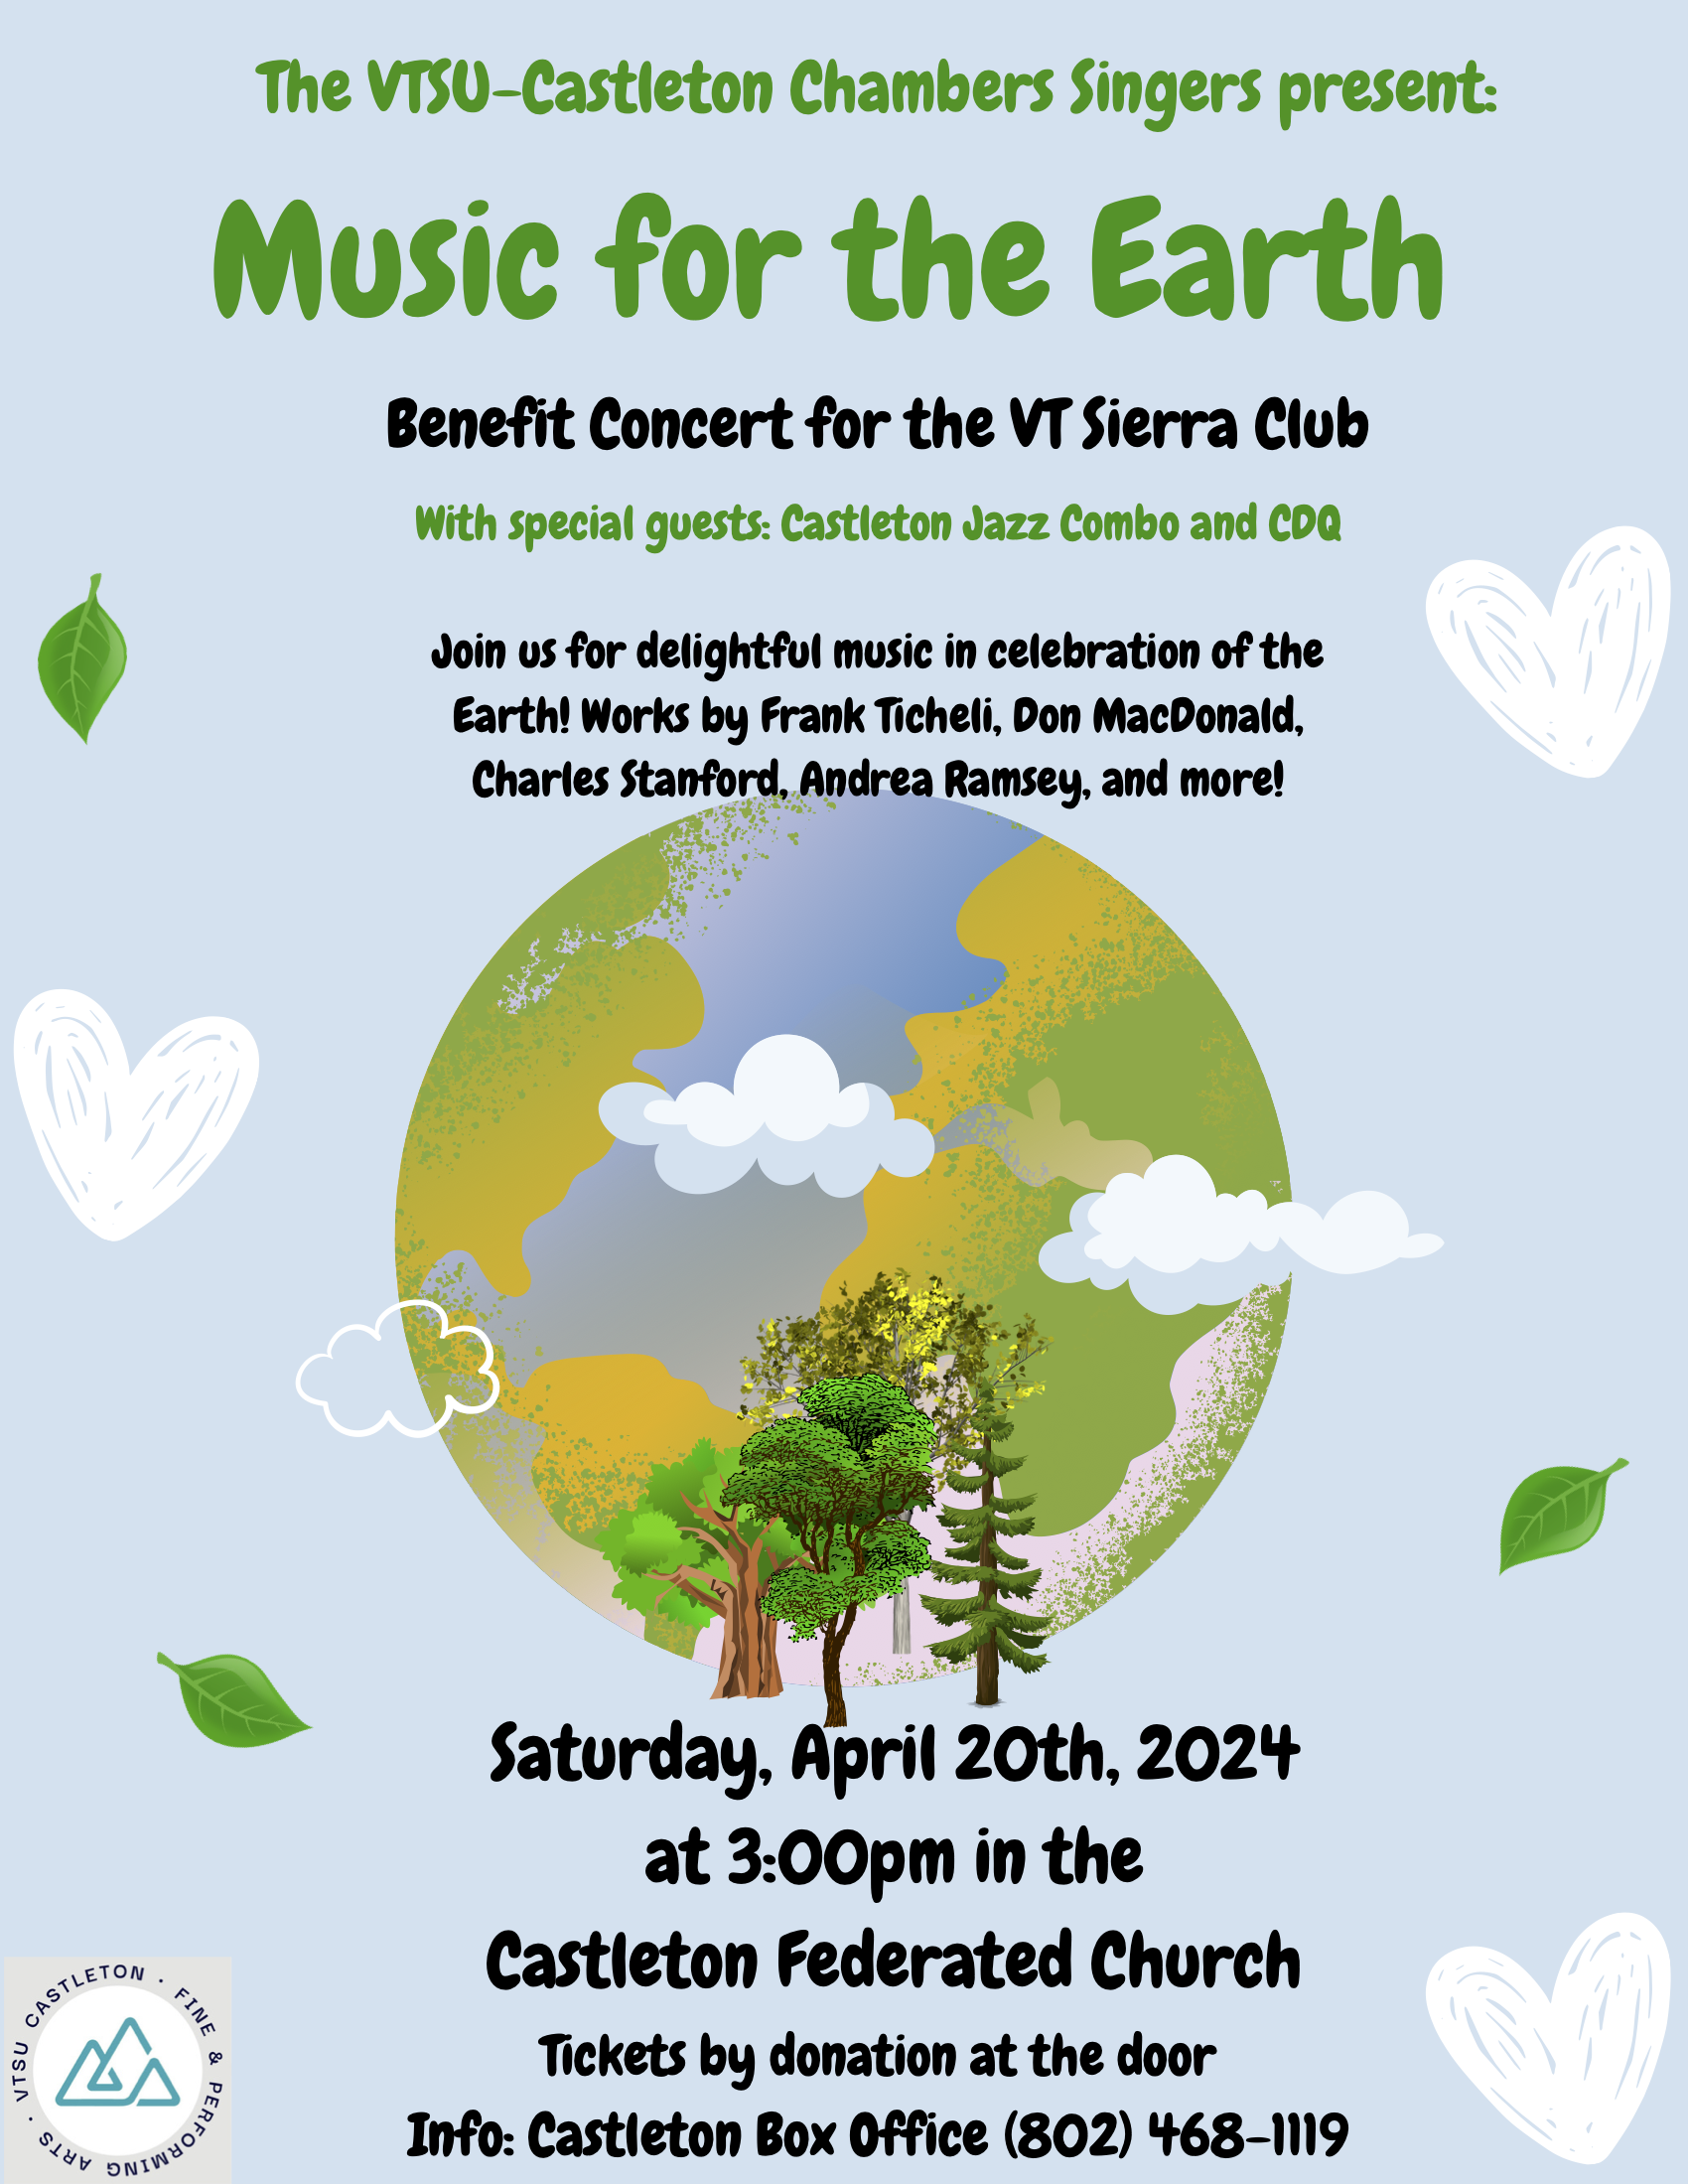 Music for the Earth:

Benefit Concert for the VT Sierra Club!

With special guests: 

Castleton Jazz Combo and CDQ

Join us for delightful music in celebration of the Earth! Works by Frank Ticheli, Don MacDonald, Charles Stanford, Andrea Ramsey, and more!

Saturday, April 20th

3:00pm | Castleton Federated Church (Mainstreet Castleton)

Tickets by donation at the door!

For more information please reach out to the Castleton Box Office at (802) 468-1119!